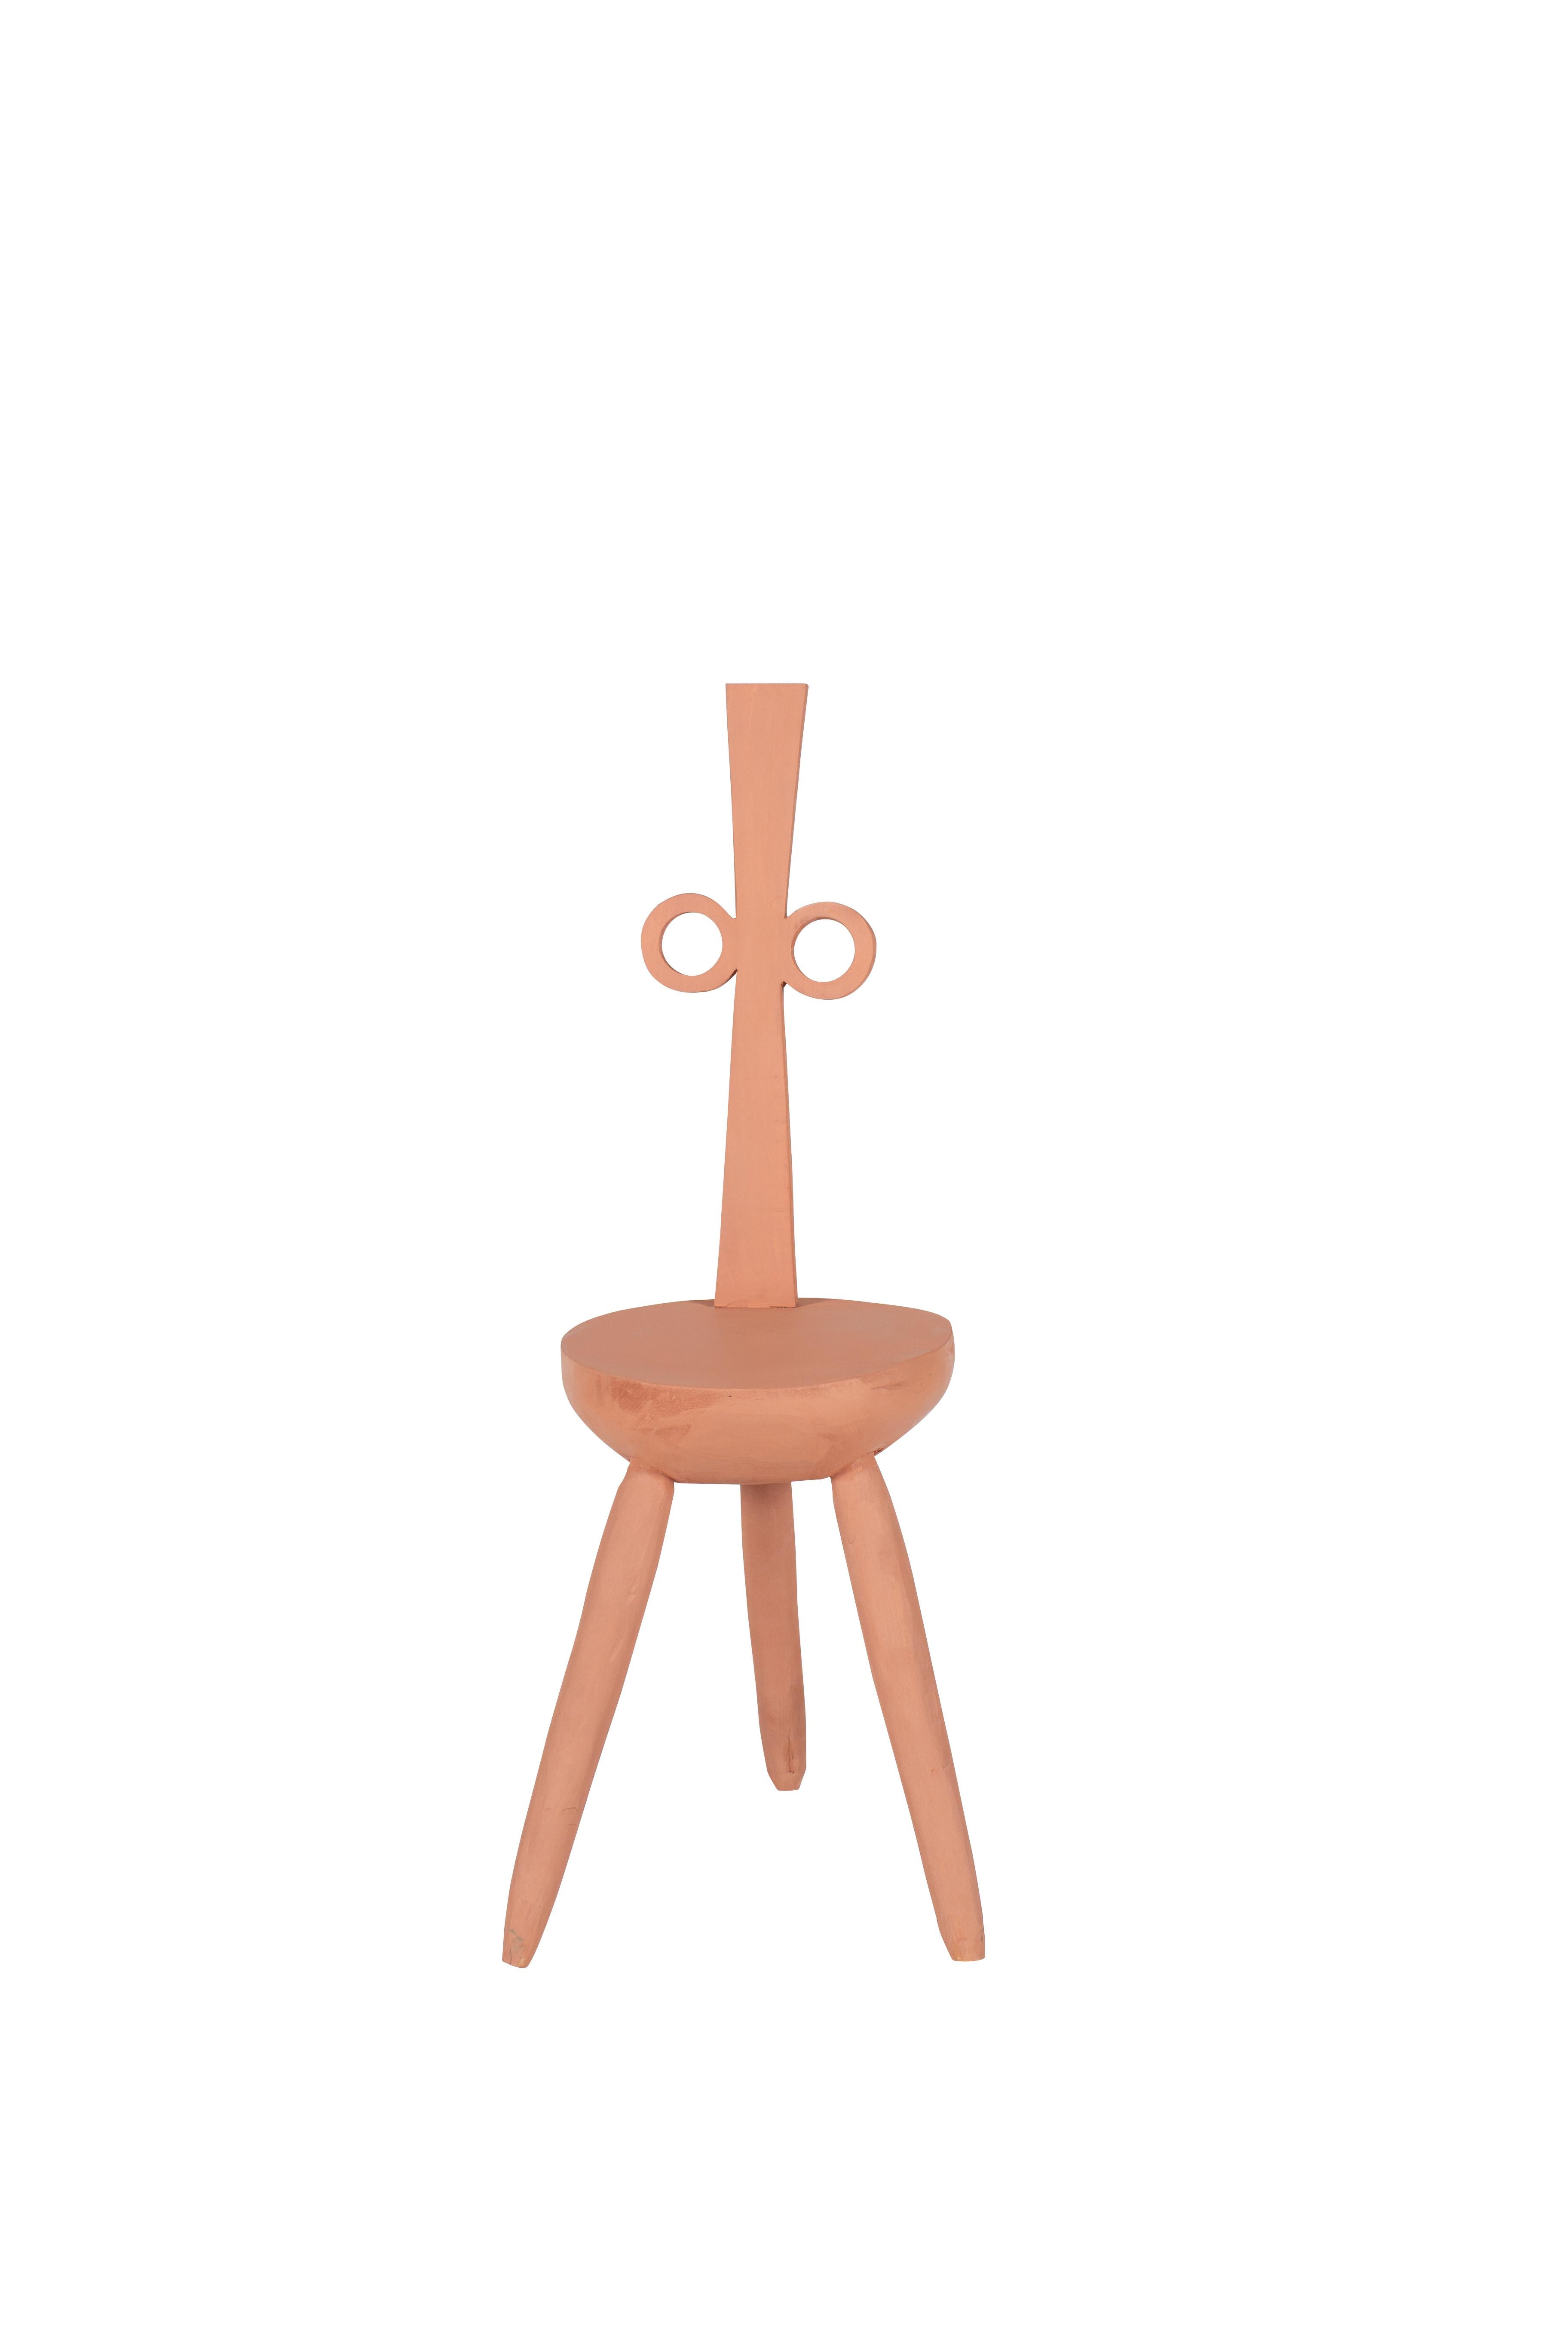 Gomez Rose Chair by Pulpo
Designed by Vasilica lsacescu & Nadja Zerunian
Dimensions: D 30 x W 30 x H 94 cm.
Materials: Wood.

Also available in black. Please contact us. 

CREEPY. WOODY. CRAFT.
Allow me, Fester, Gomez, Little Tully, Lumpy,